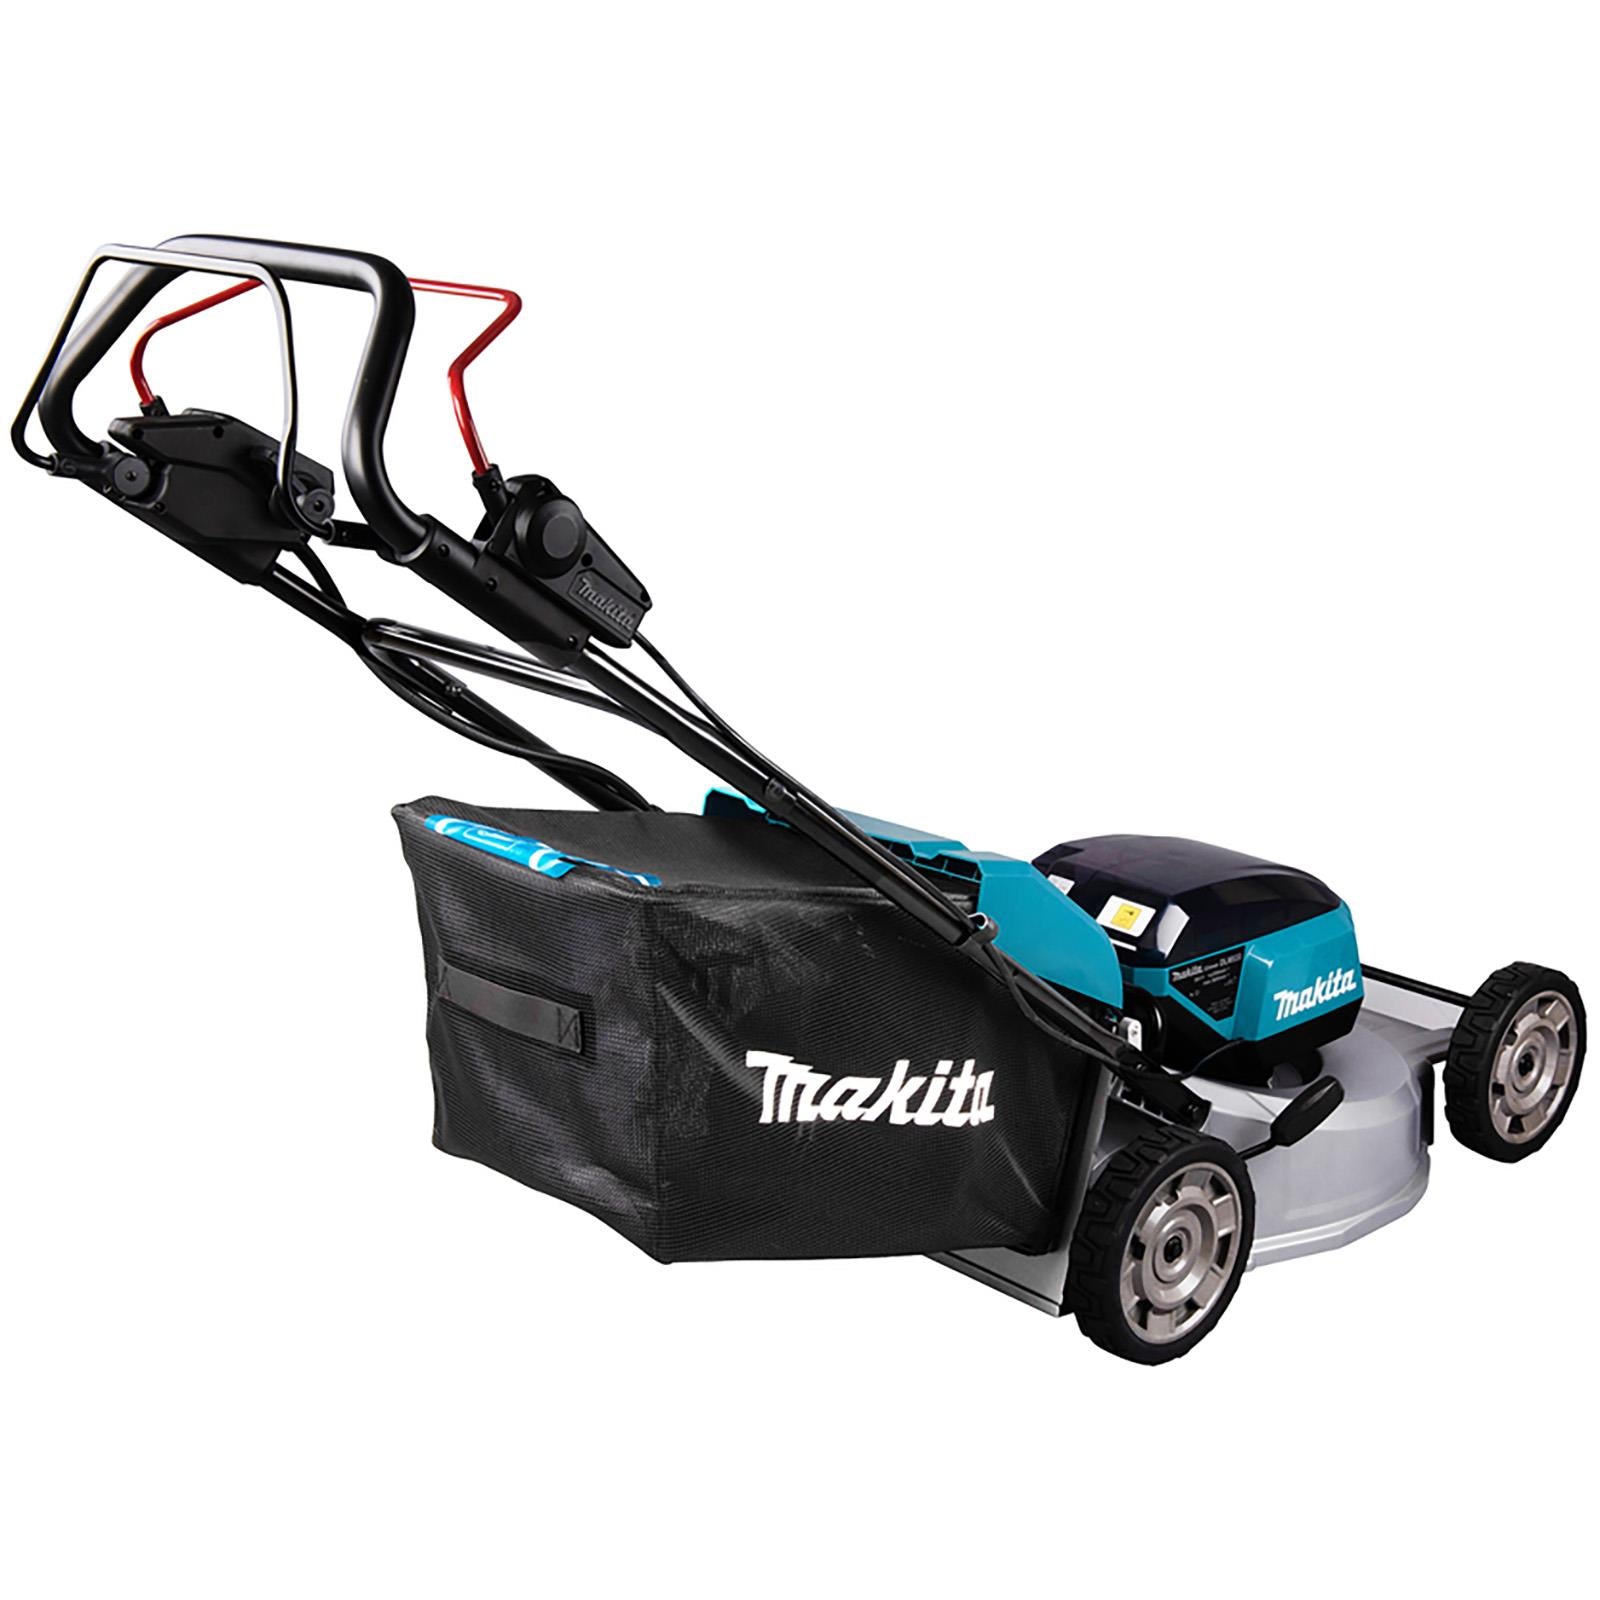 Makita 53cm Lawn Mower Kit Twin 18V LXT Li-ion Cordless Garden Grass Outdoor 2 x 6Ah Battery and Dual Rapid Charger DLM533PG2